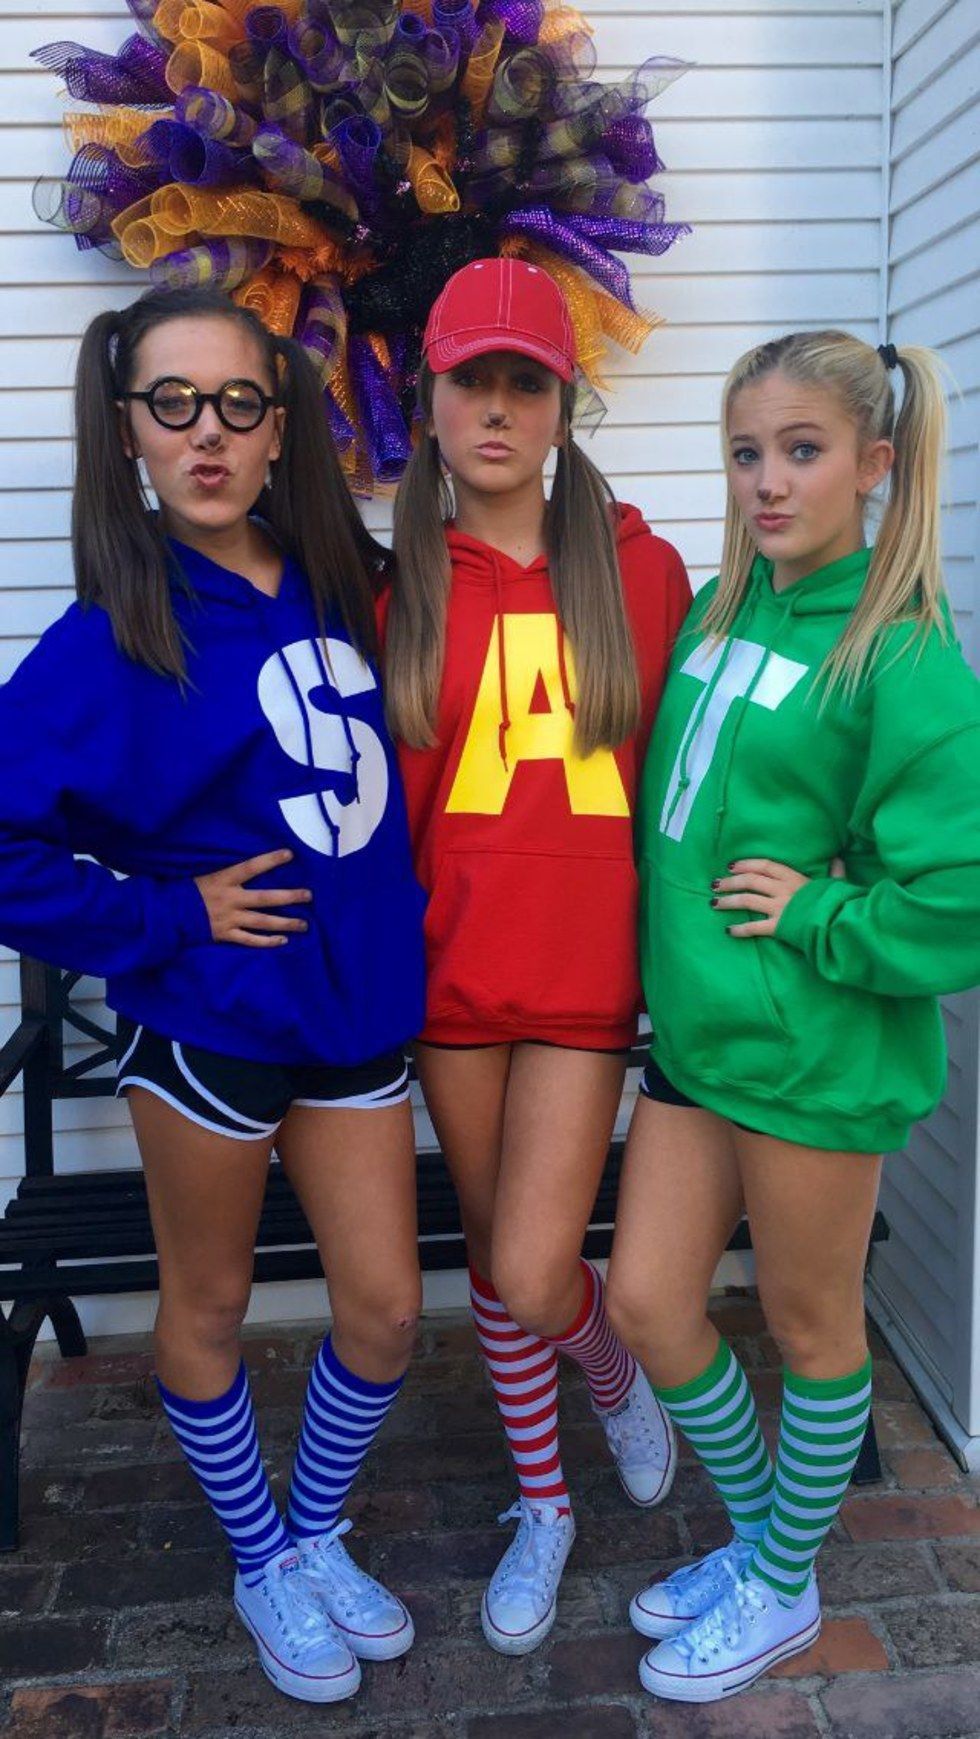 31 Greatest DIY Halloween Costumes For College Students - 31 Greatest DIY Halloween Costumes For College Students -   22 diy Halloween Costumes bff ideas